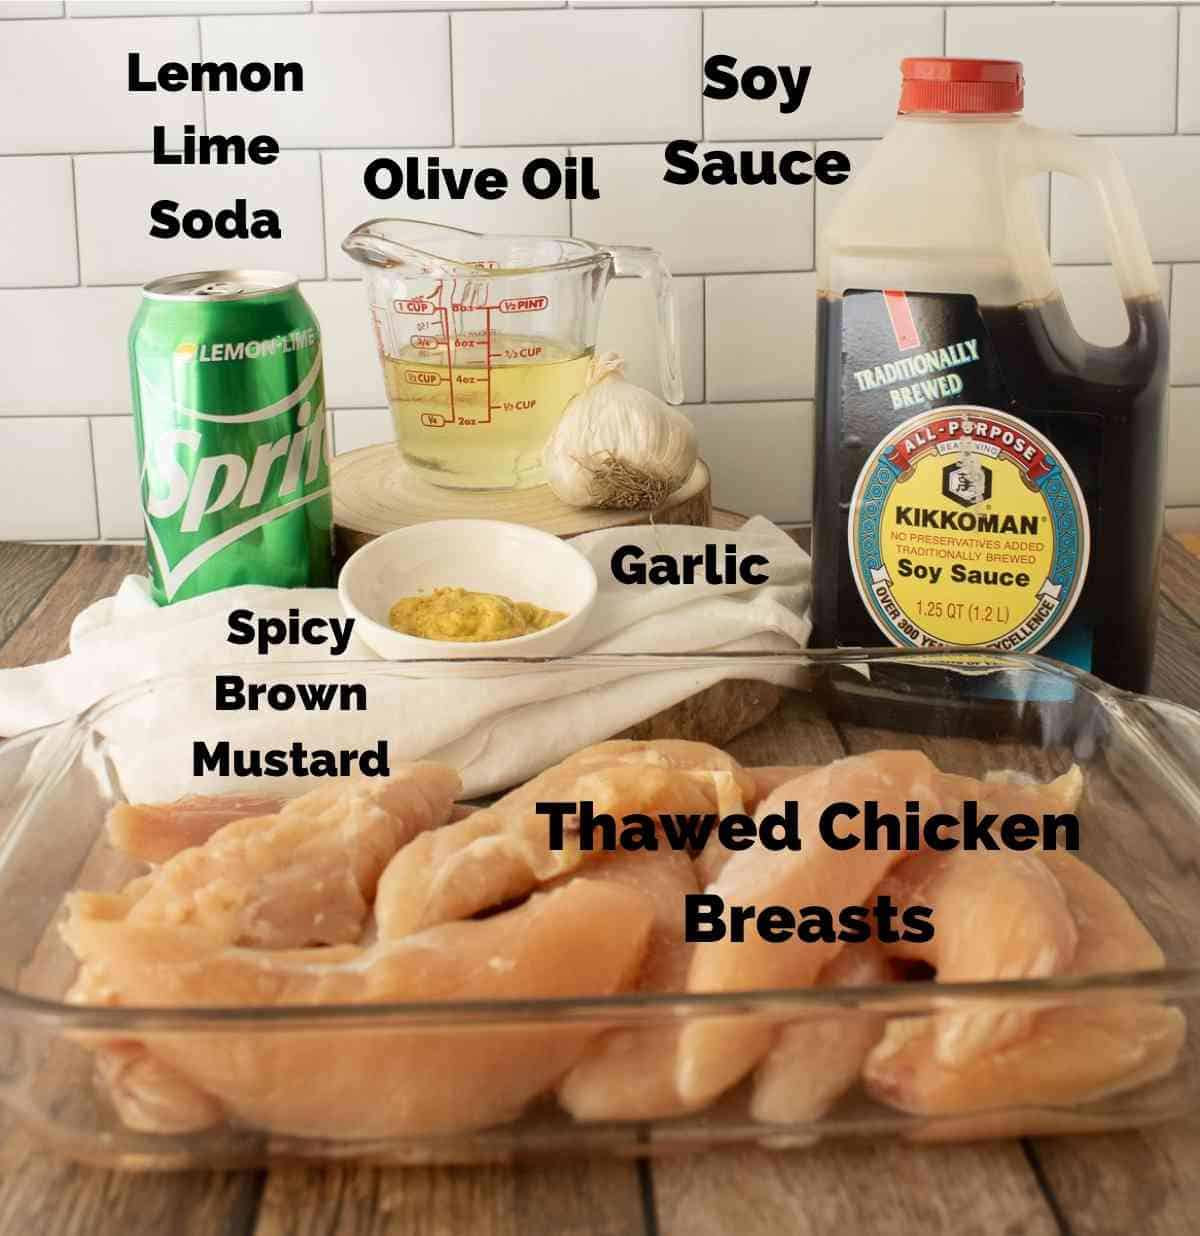 Ingredients for this chicken marinade.